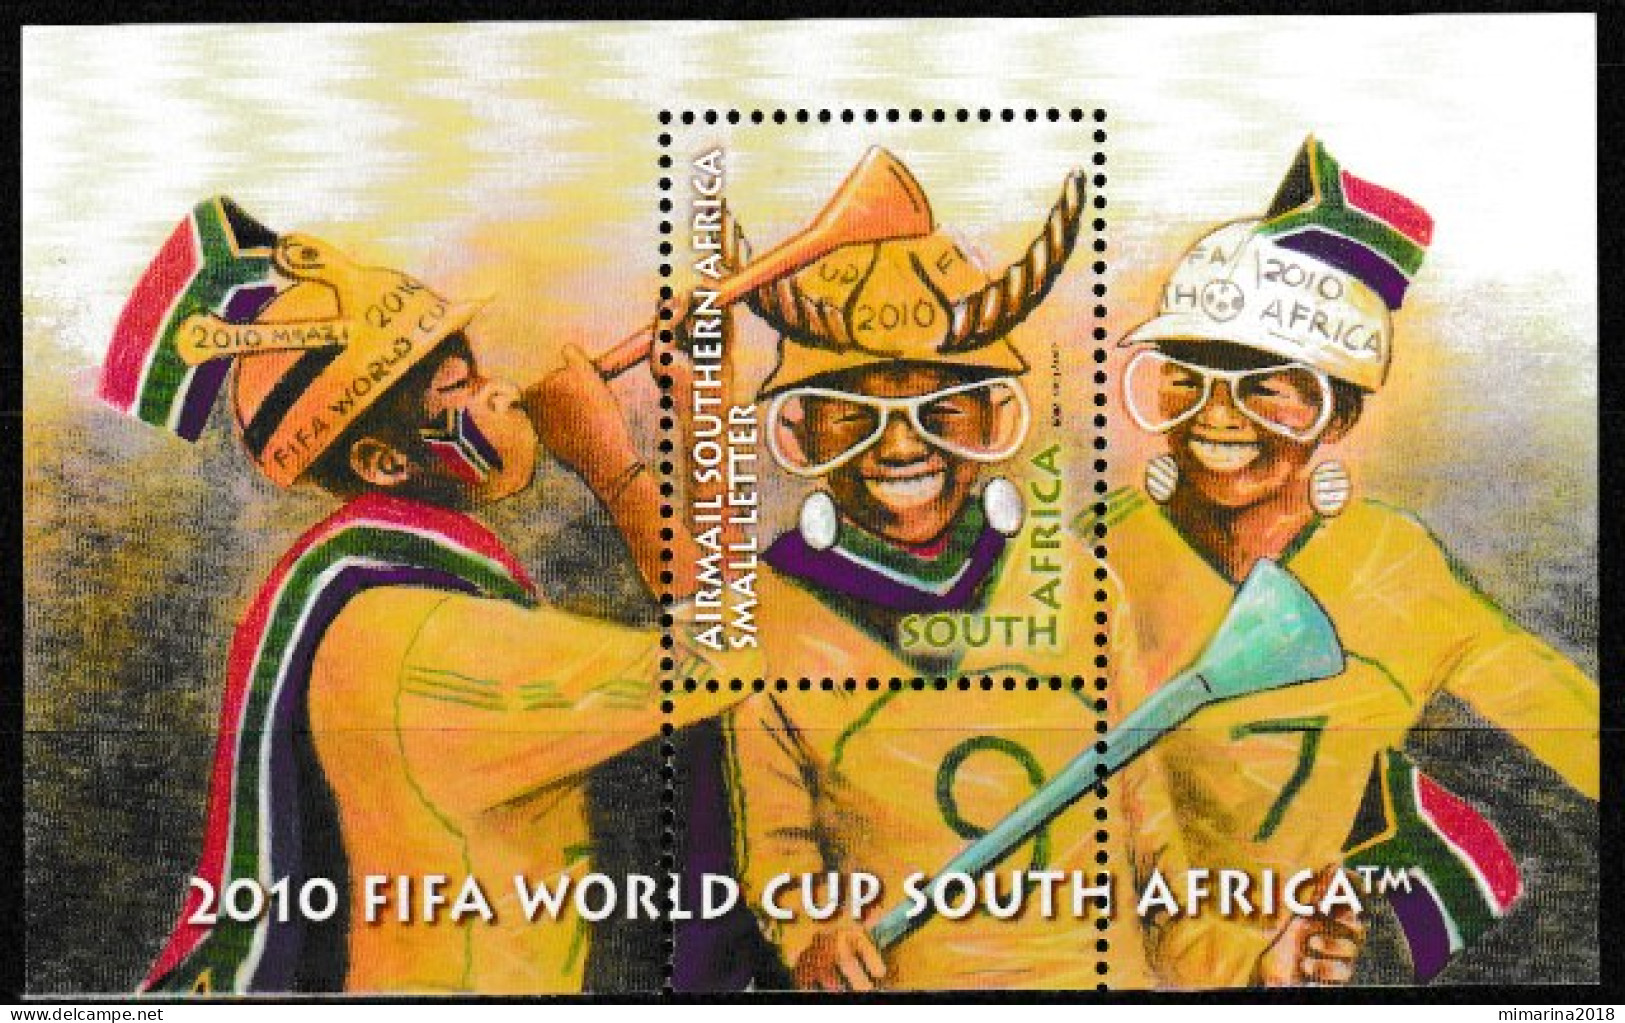 RSA  SOUTH AFRICA  MNH  2010  "FIFA WORLD CUP" - Unused Stamps